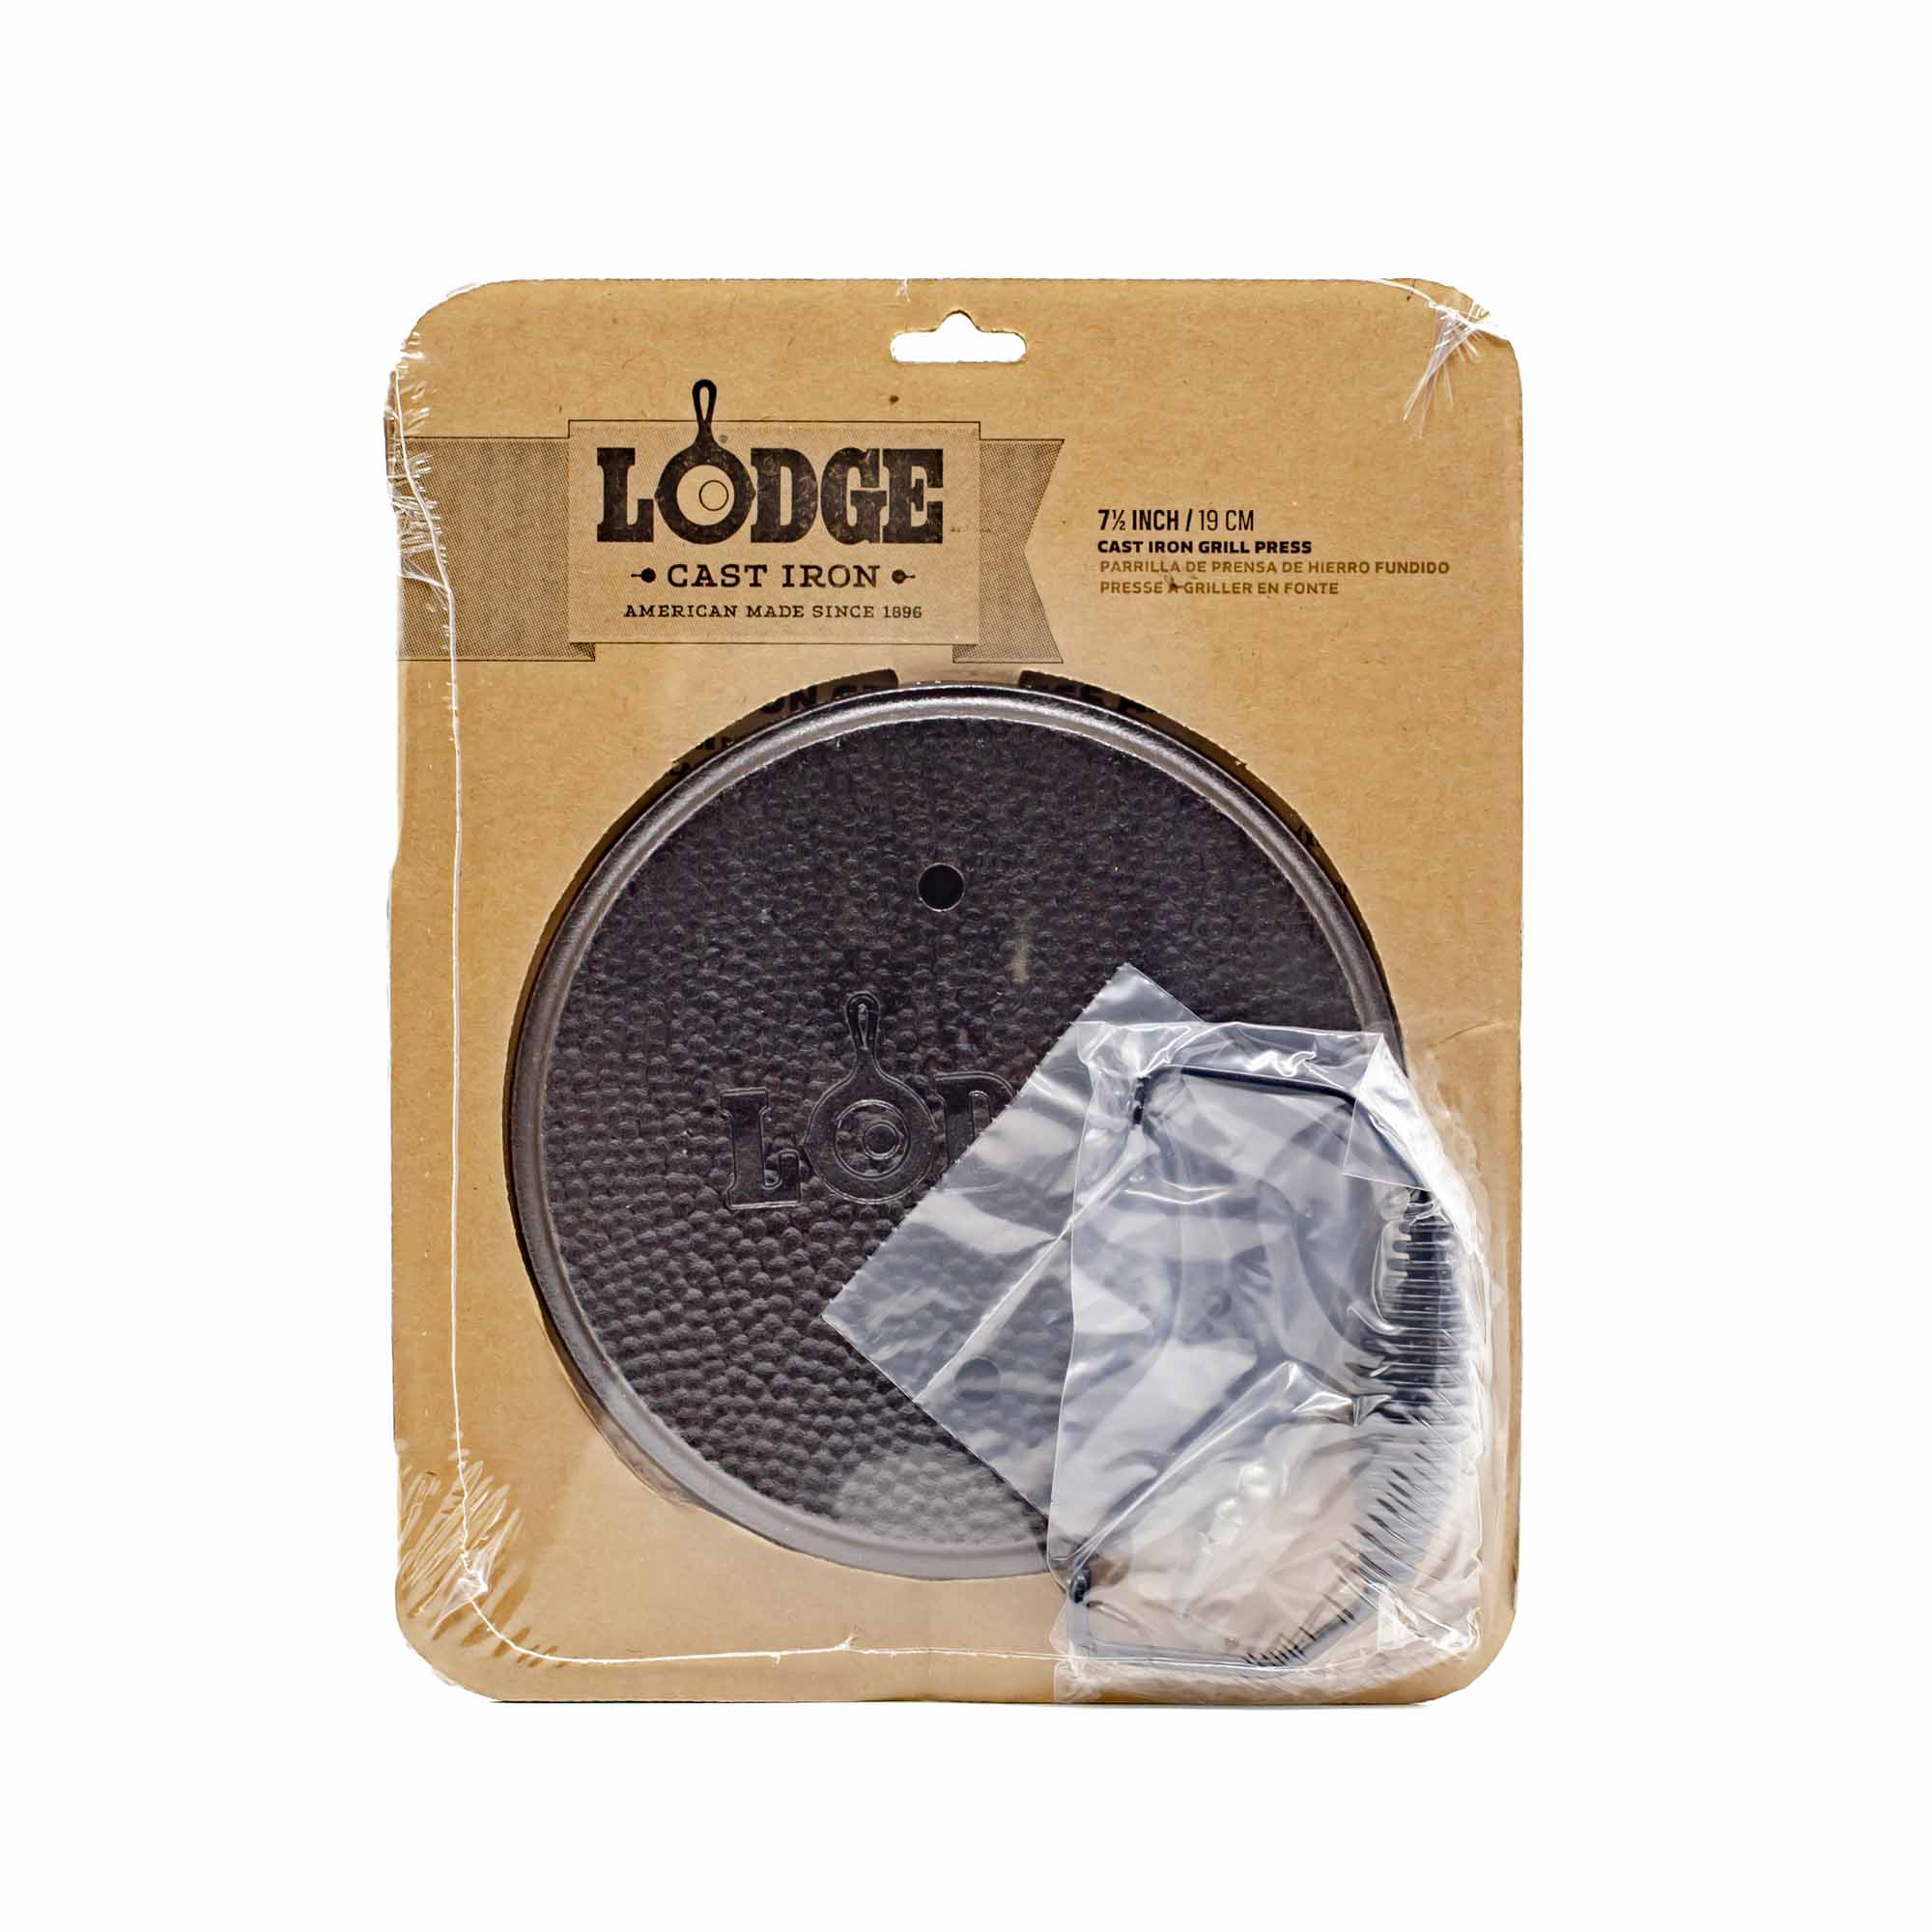 Lodge Logic Round Grill Press 7 1/2" - Mortise And Tenon